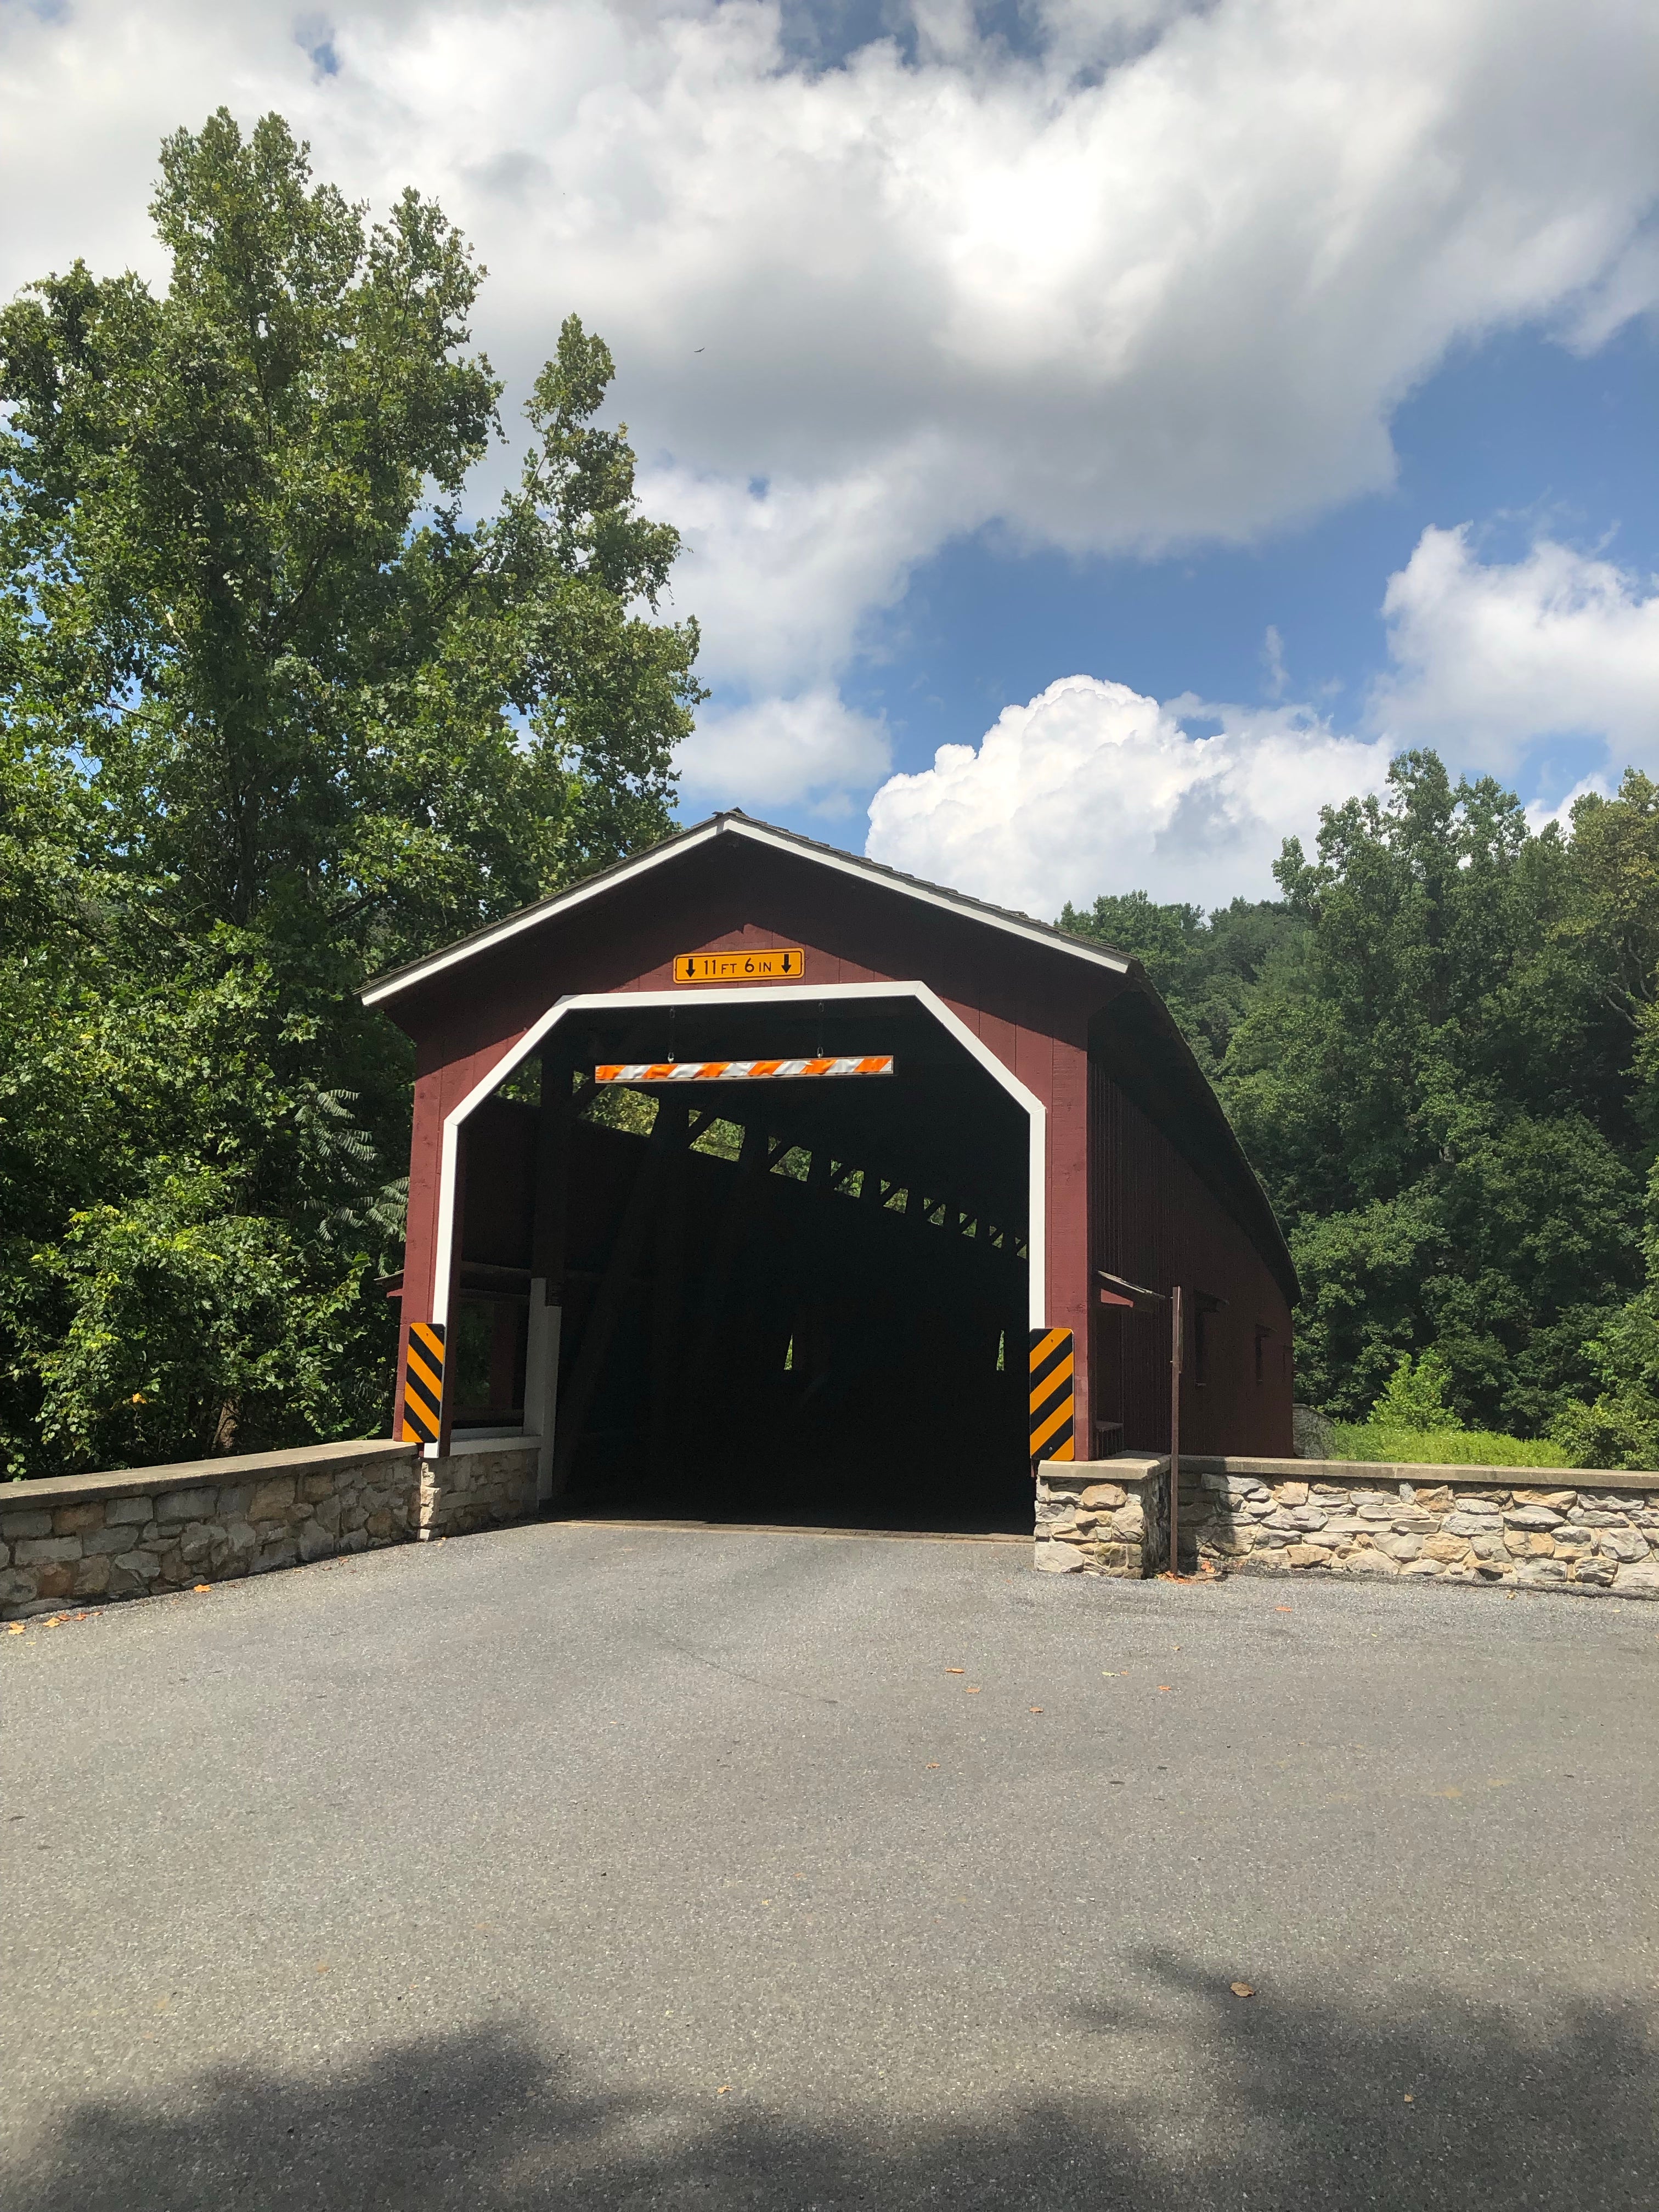 Covered bridge at entrance to campground